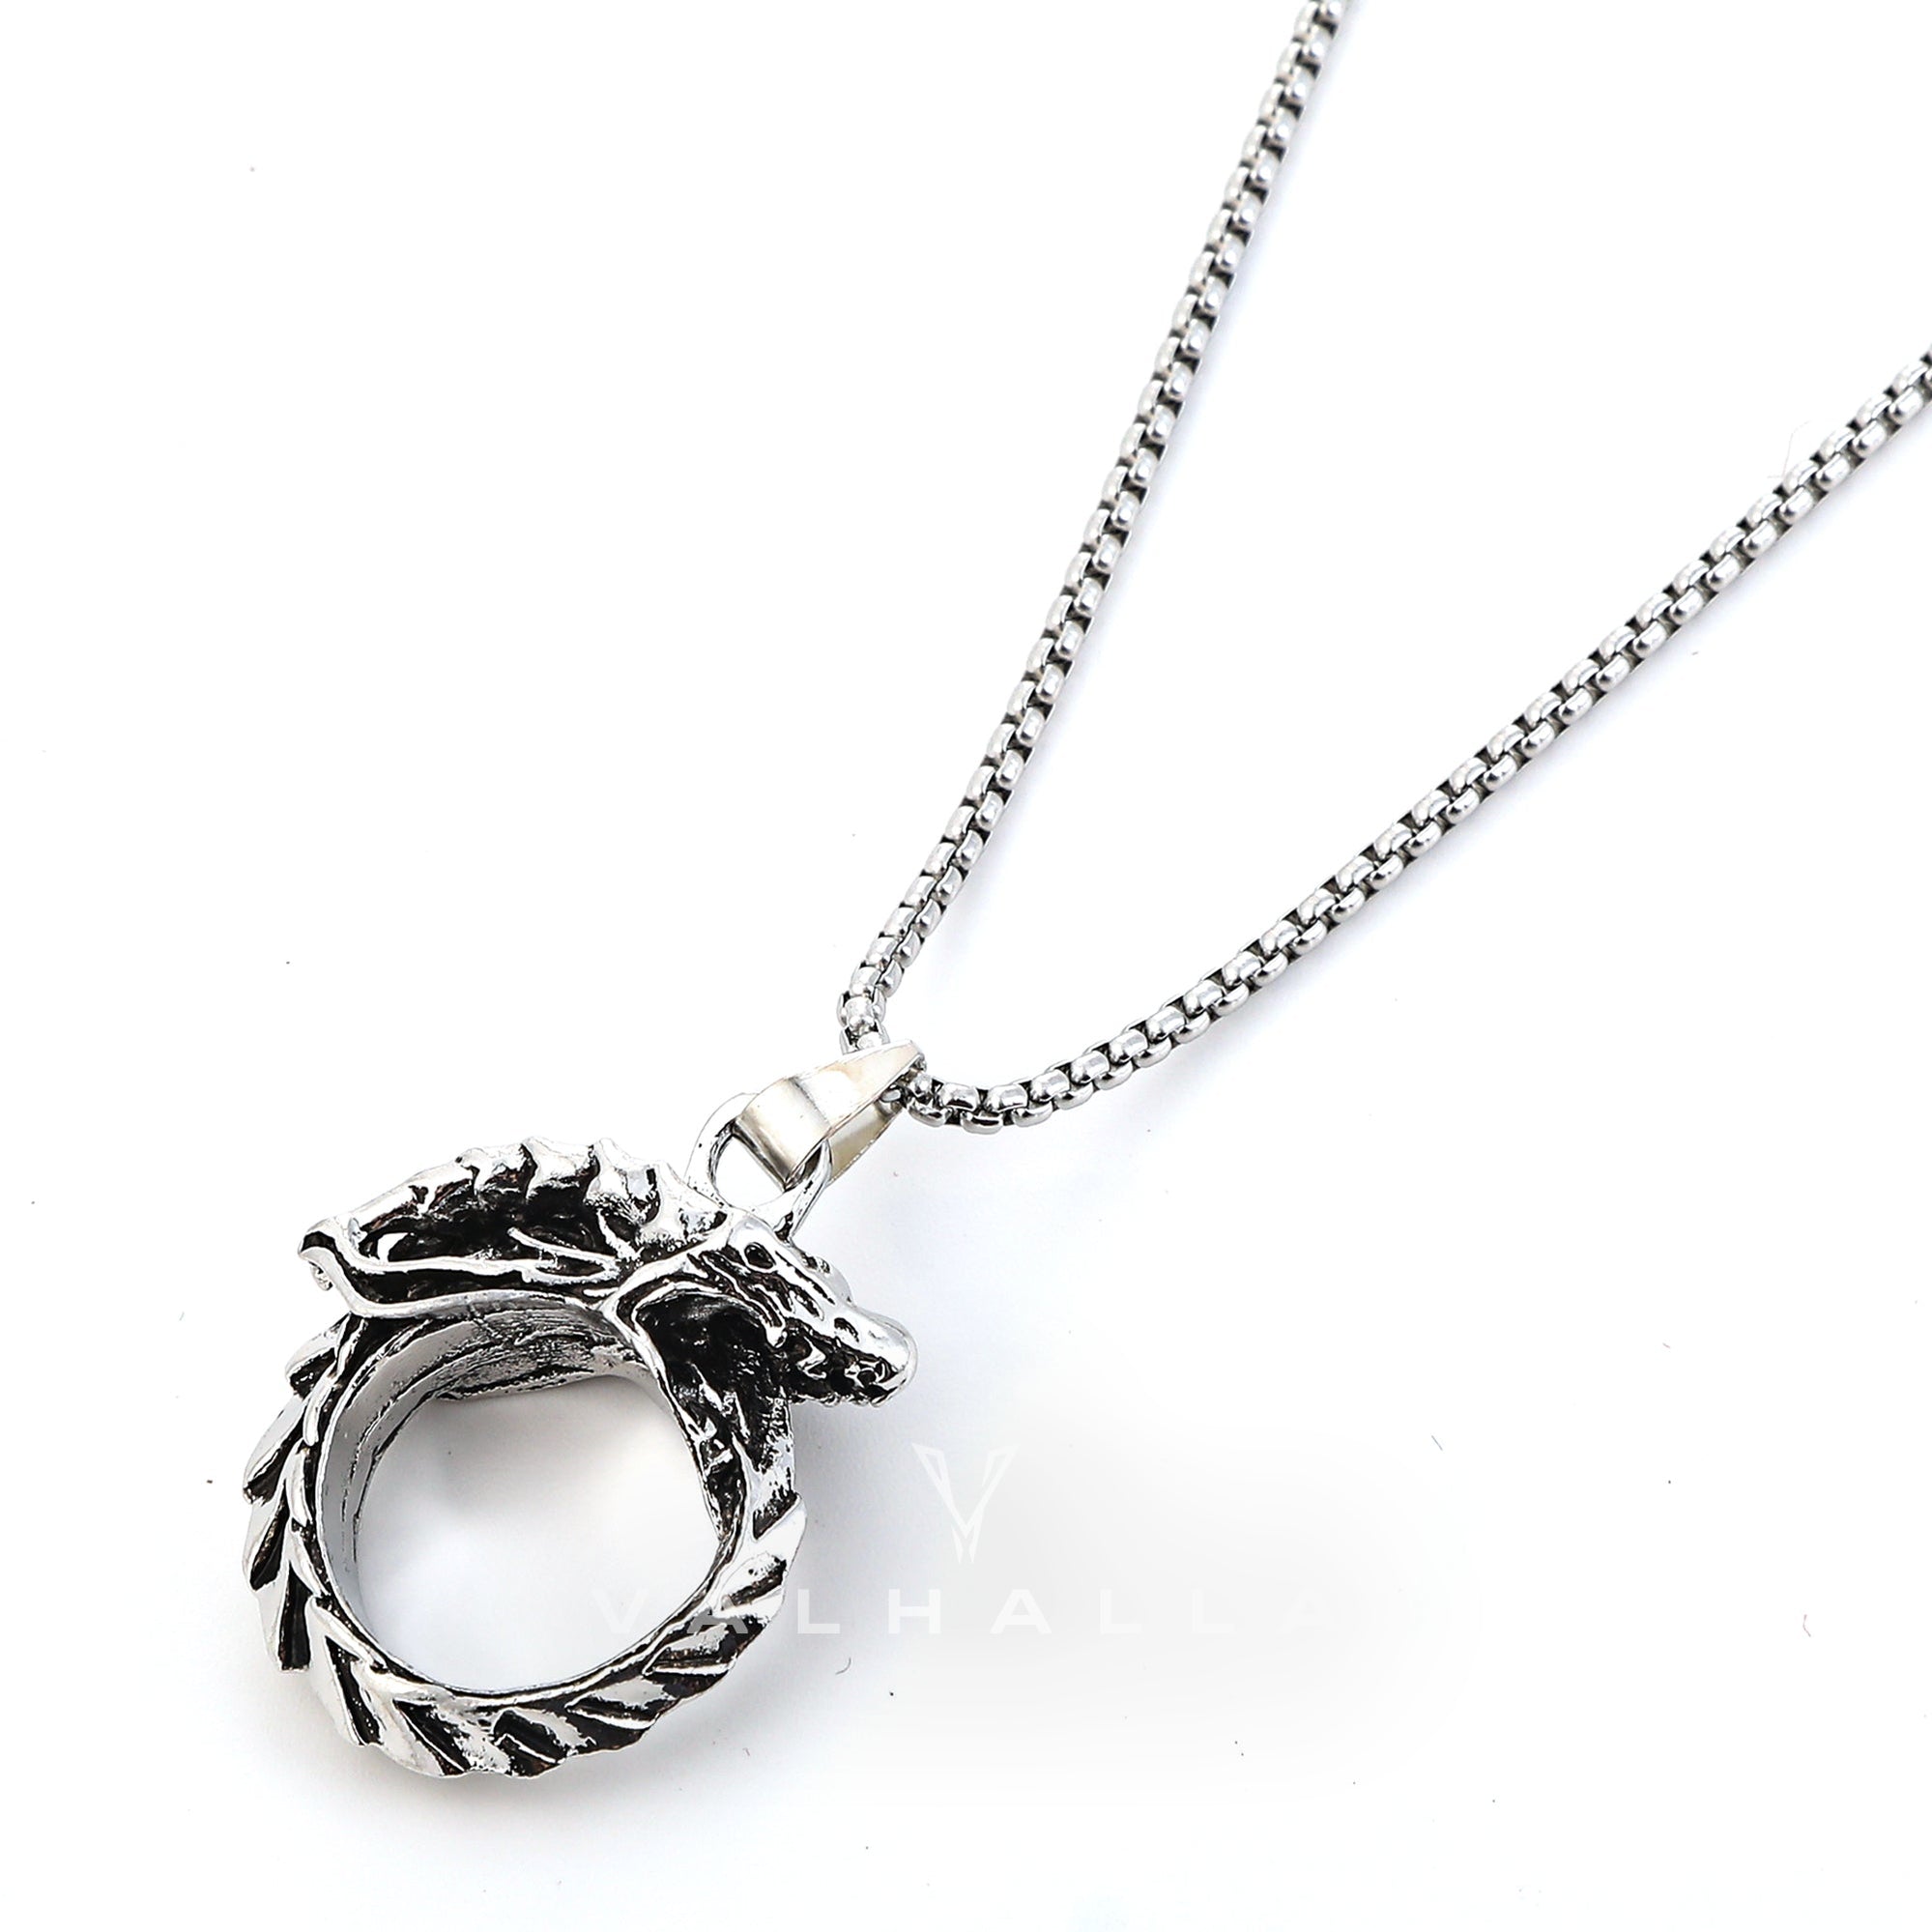 Handcrafted Stainless Steel Jormungand Pendant & Chain